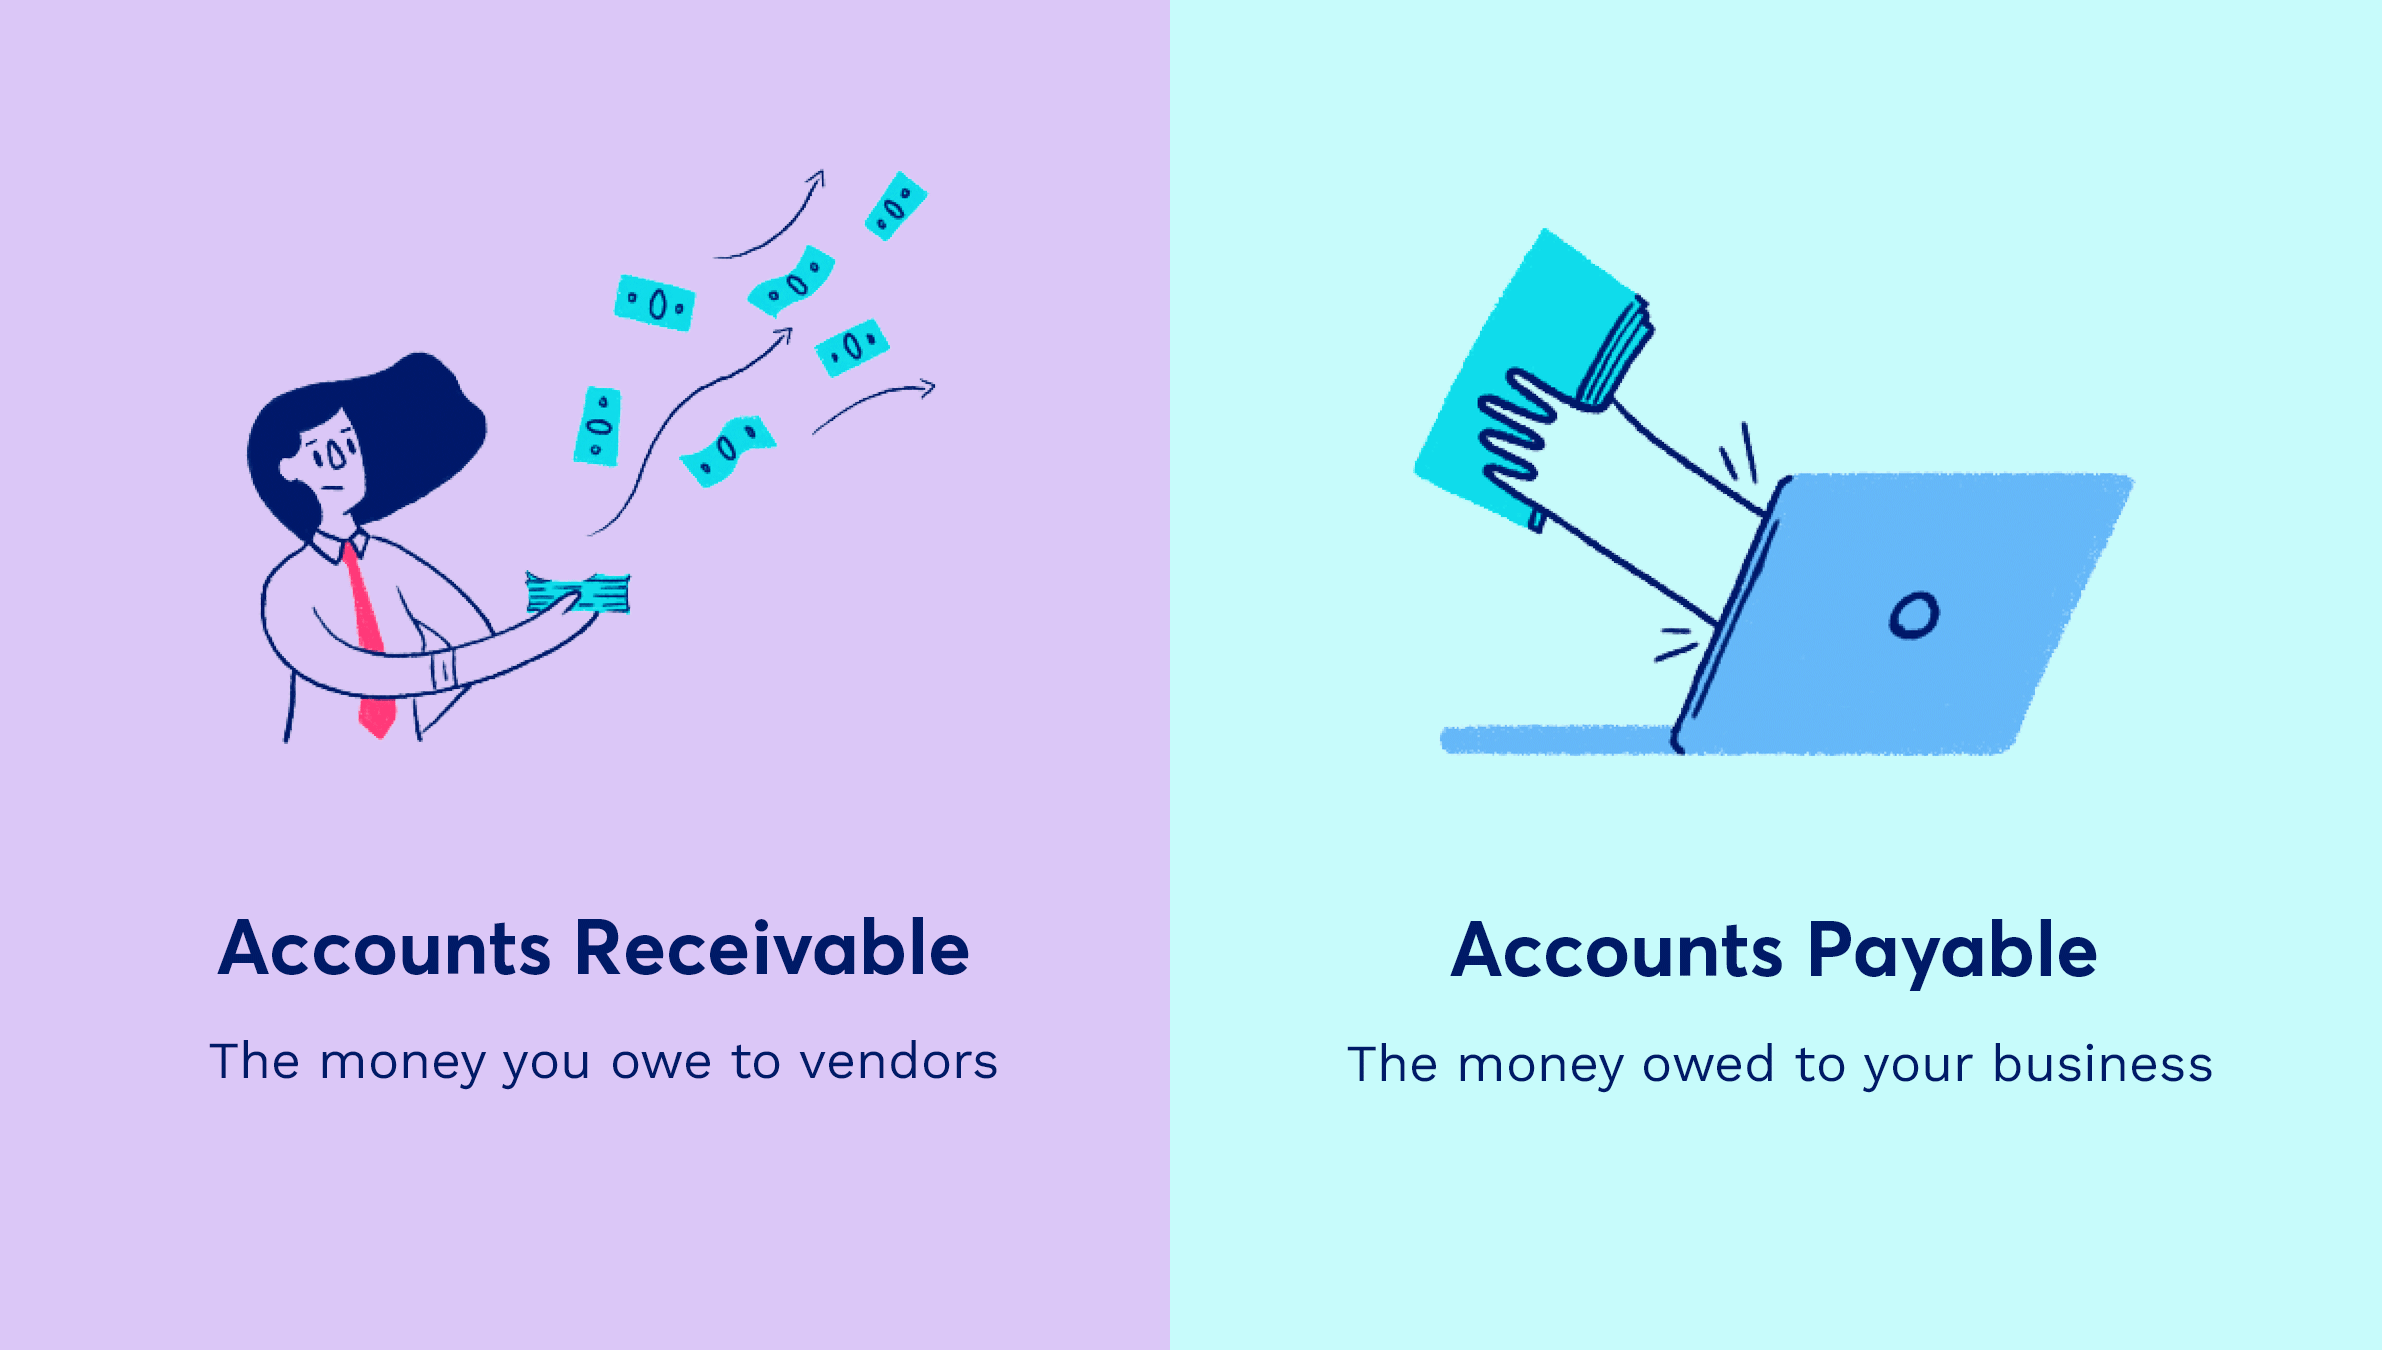 Accounts Receivable: the money you owe to vendors. Accounts Payable: the money owed to your business.